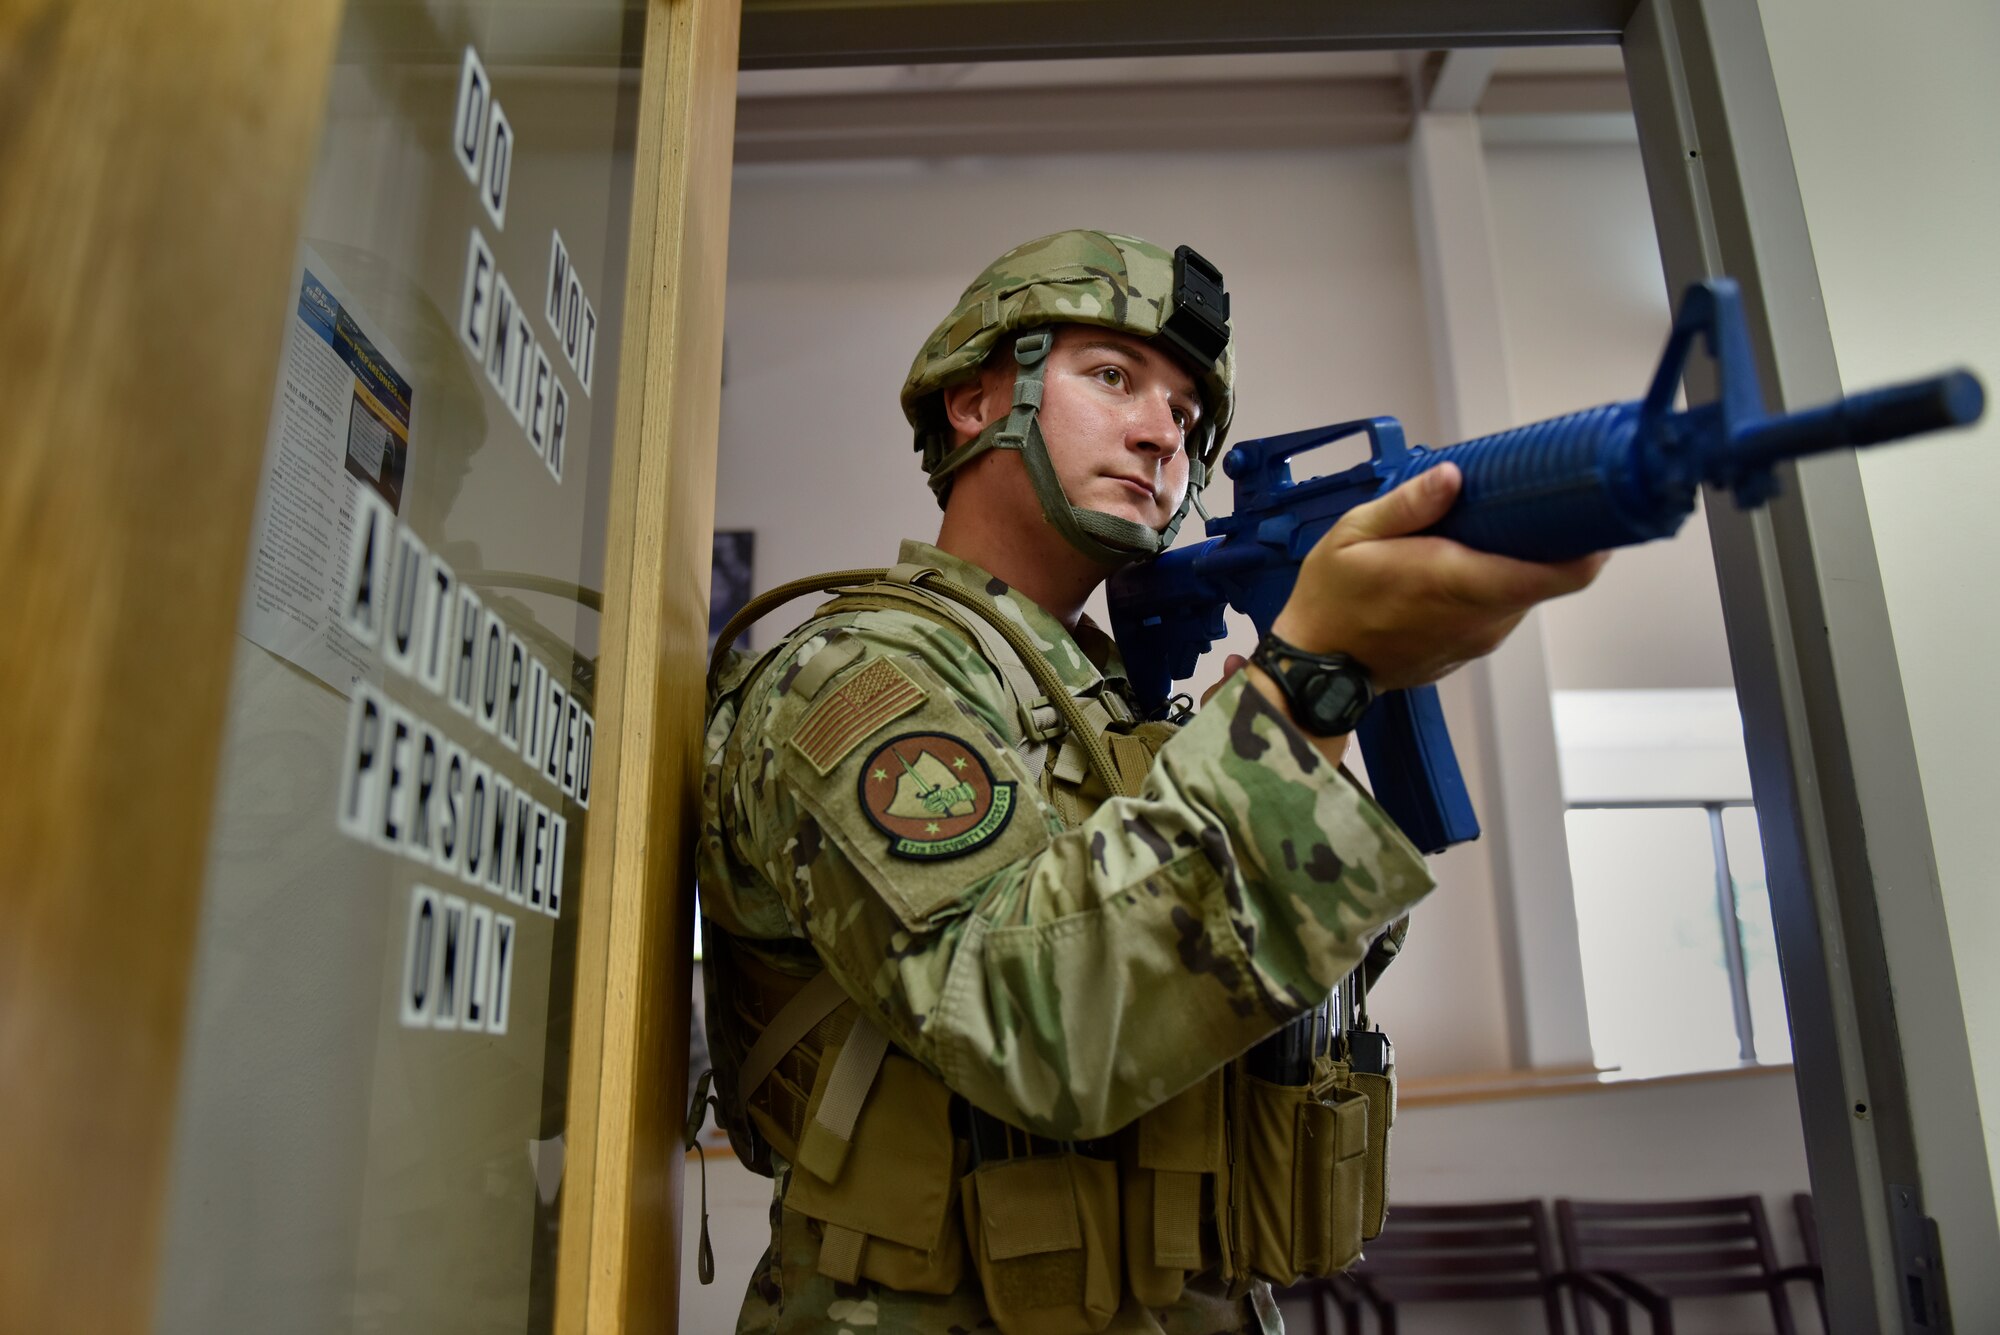 Senior Airman Alexander Larson stands watch during an active shooter training at Laughlin Air Force Base, Texas, July 22, 2019. The exercise, aimed at bolstering crisis readiness and response capabilities, simulated a hostage situation that lasted for nearly two hours. (U.S. Air Force photo by Staff Sgt. Benjamin N. Valmoja)